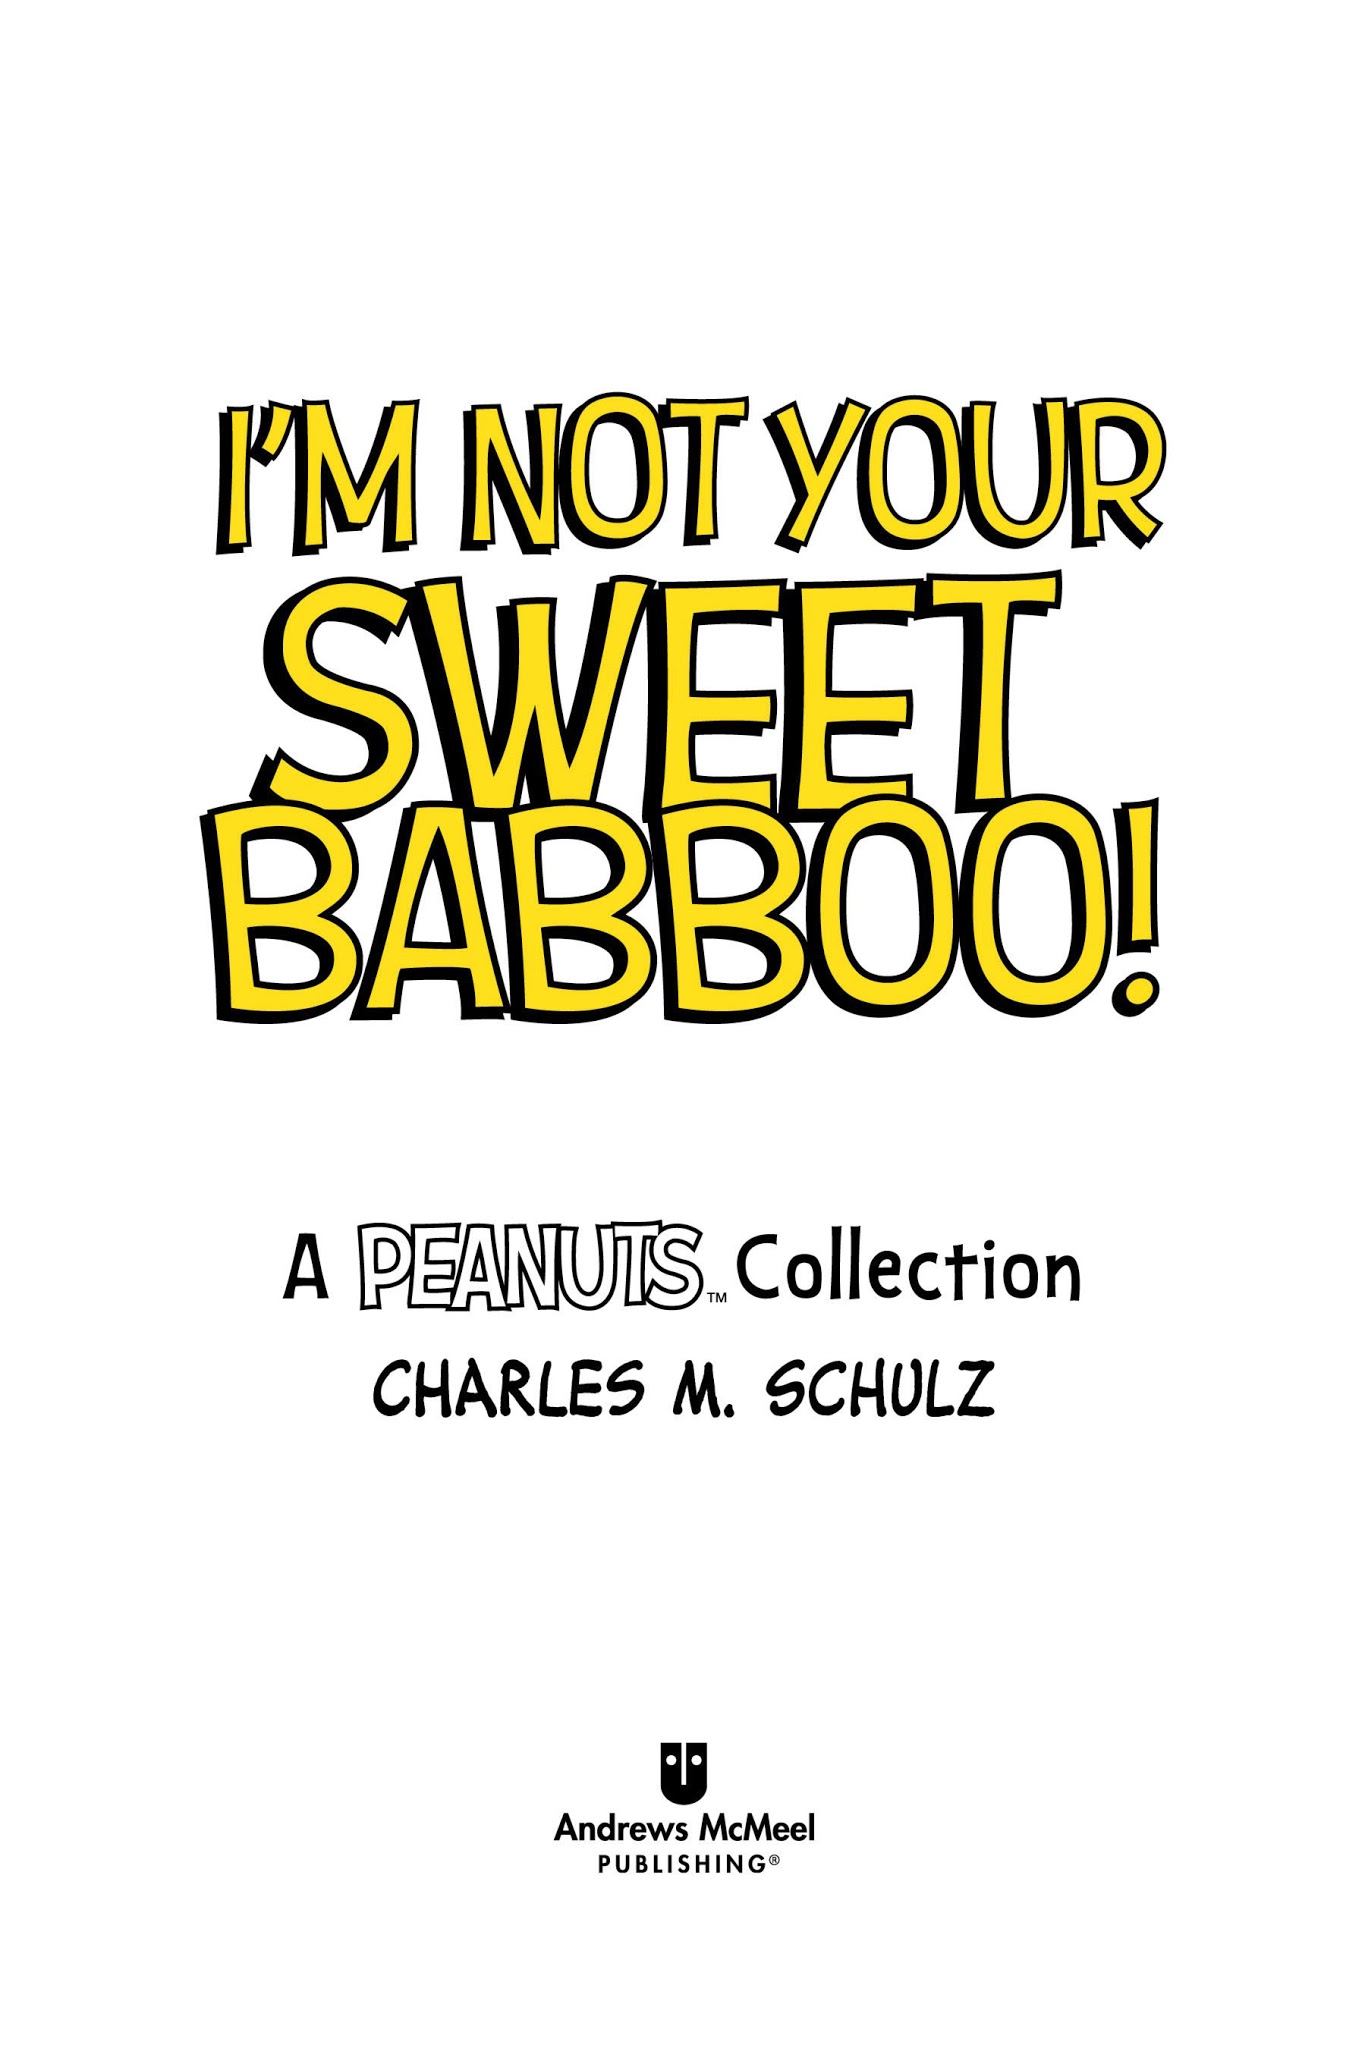 Read online I'm Not Your Sweet Babboo! comic -  Issue # TPB - 3